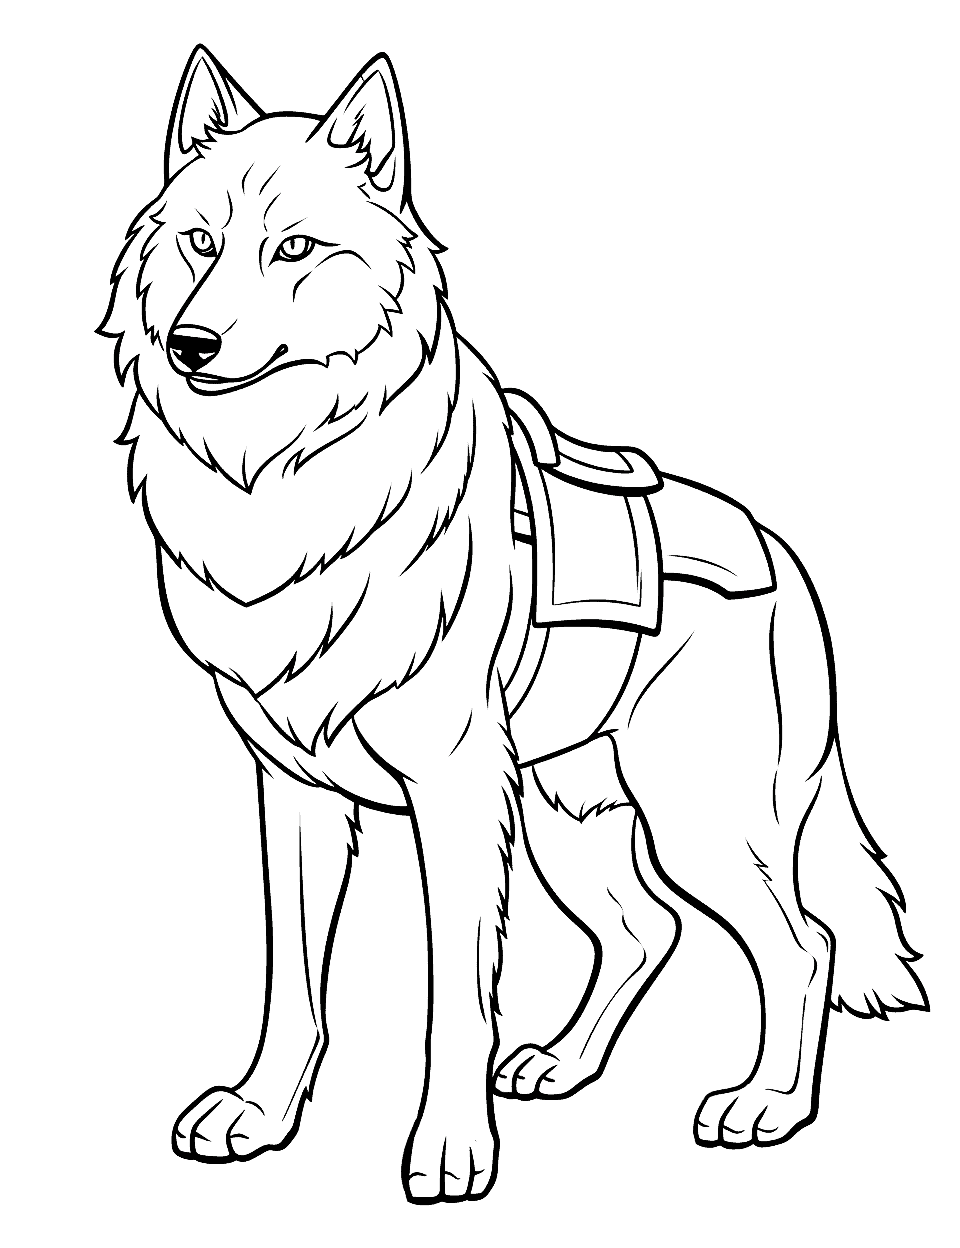 Wolf in Armor Coloring Page - A valiant wolf wearing medieval armor.